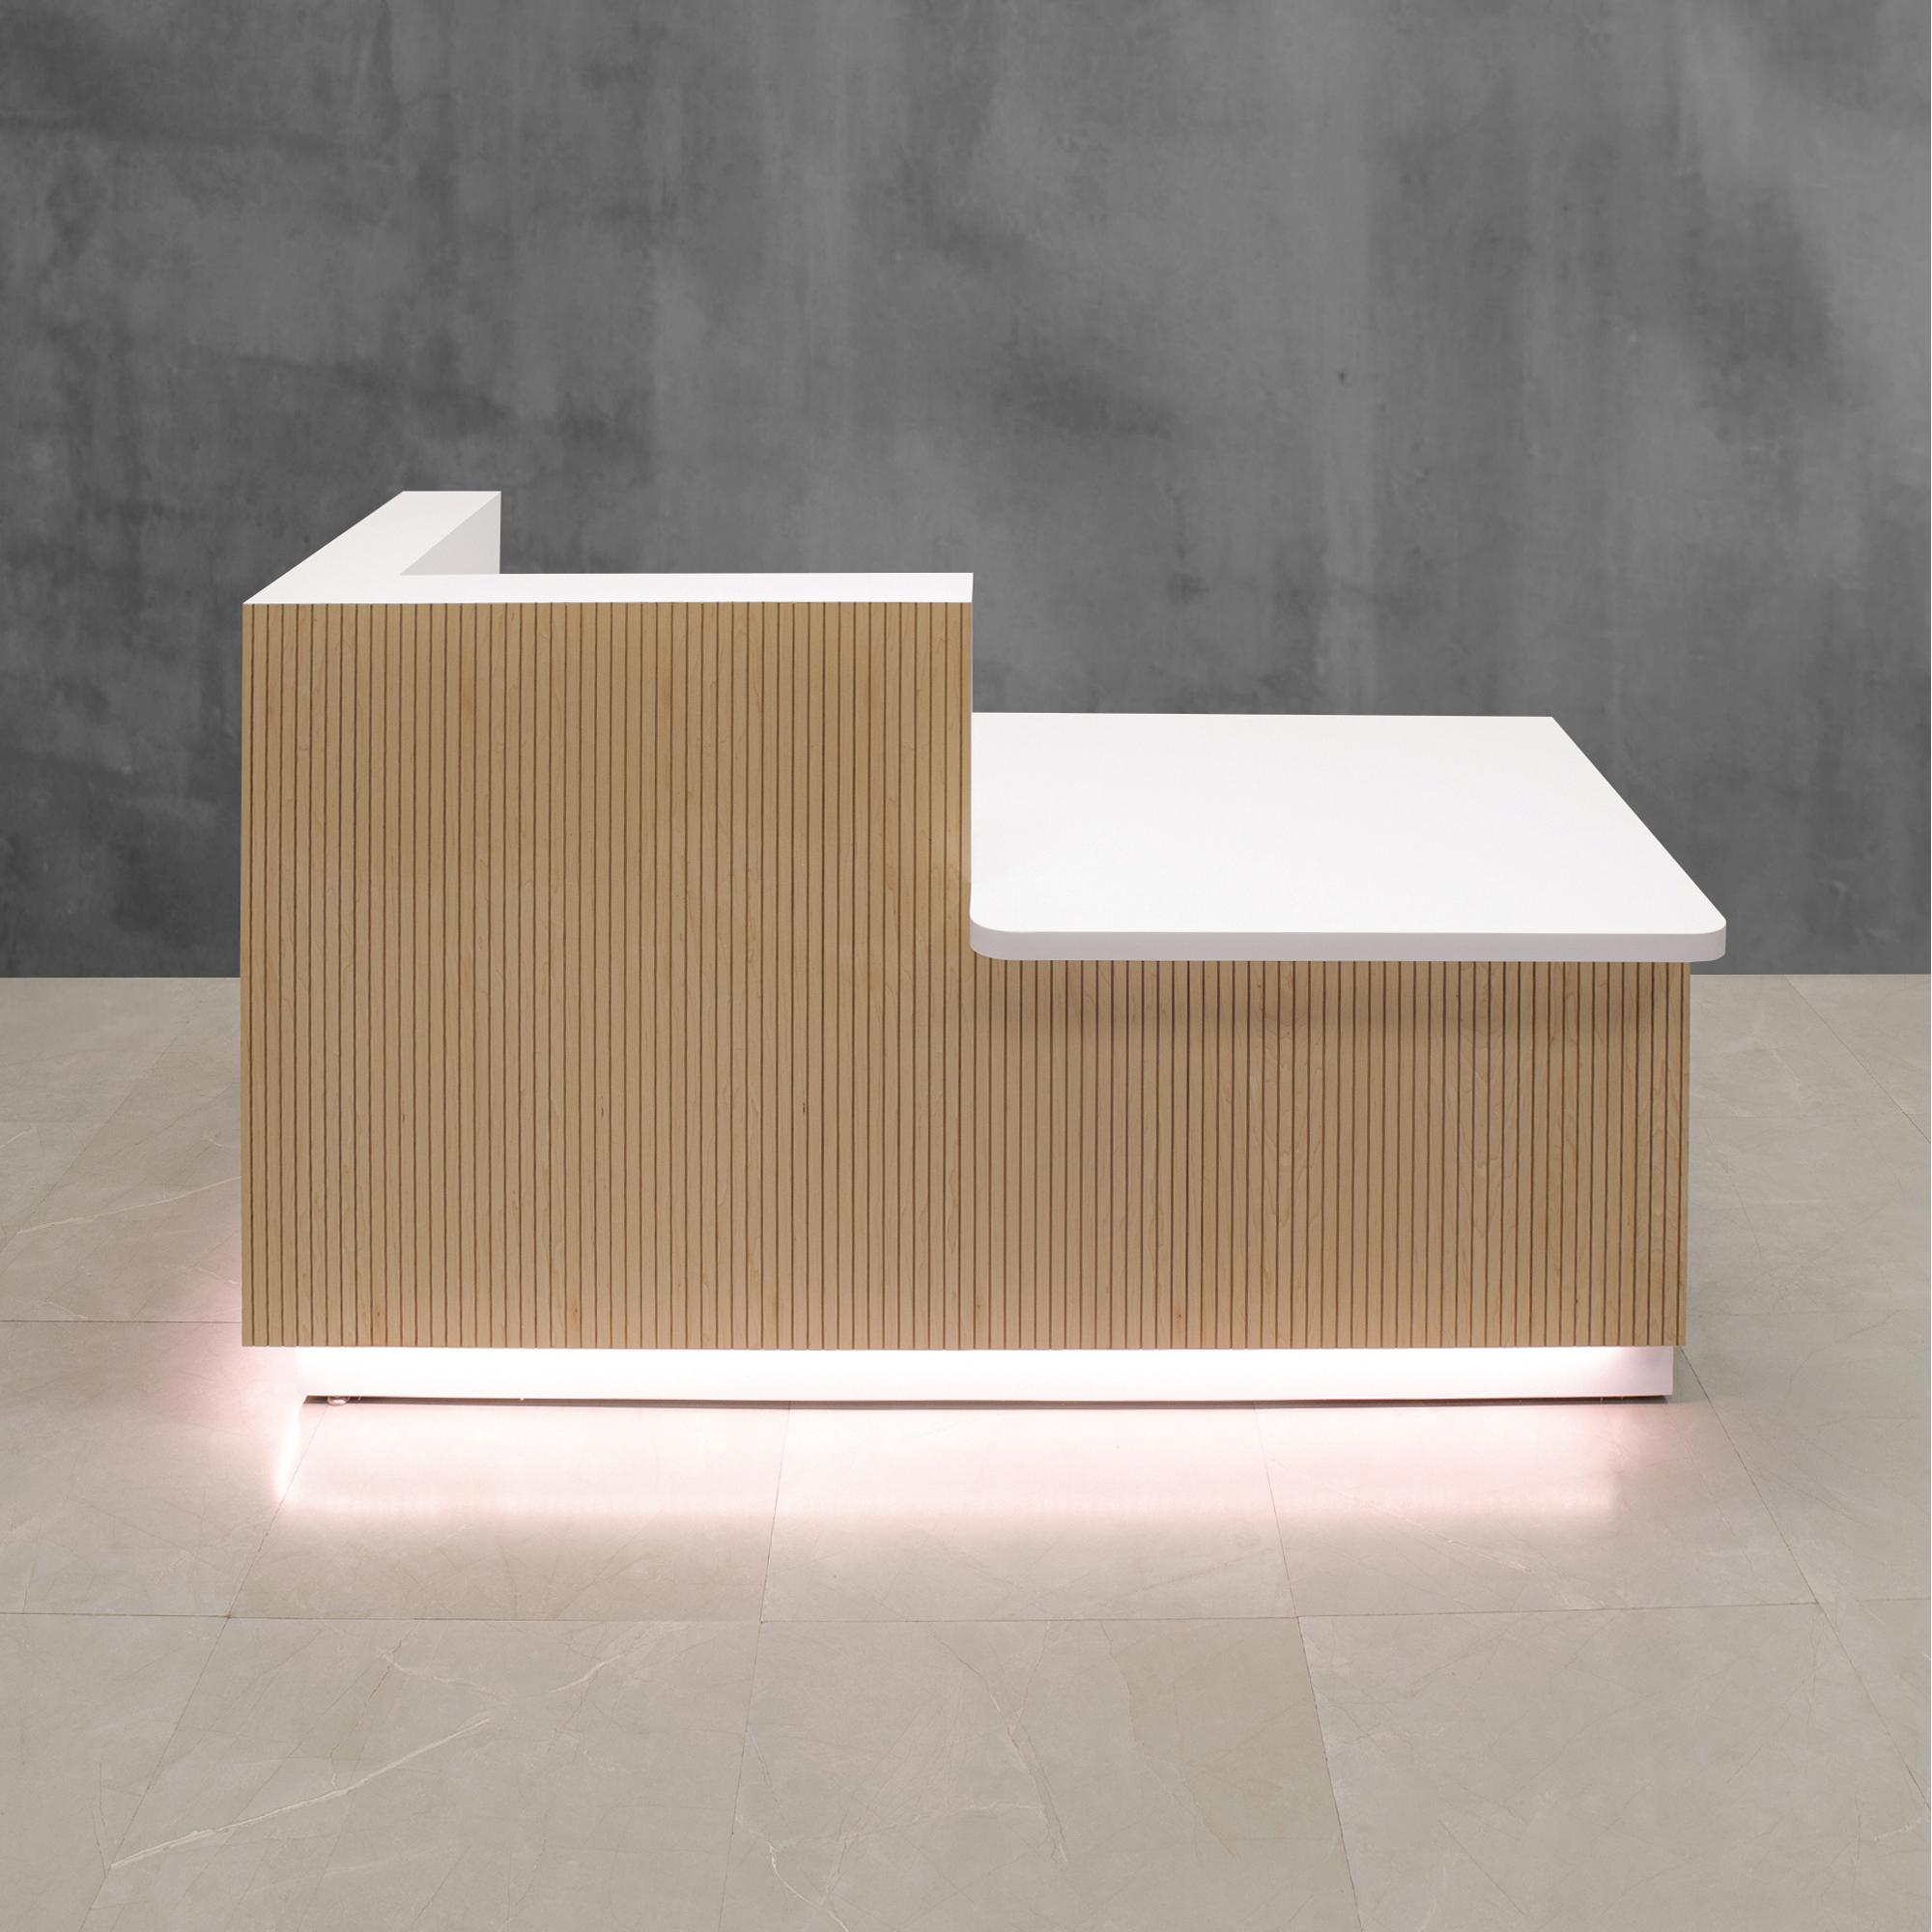 60-inch Dallas ADA Compliant Counter Reception Desk desk counter right side when facing front in maple tambour and white matte laminate workspace and brushed aluminum toe-kick, with white LED, shown here.